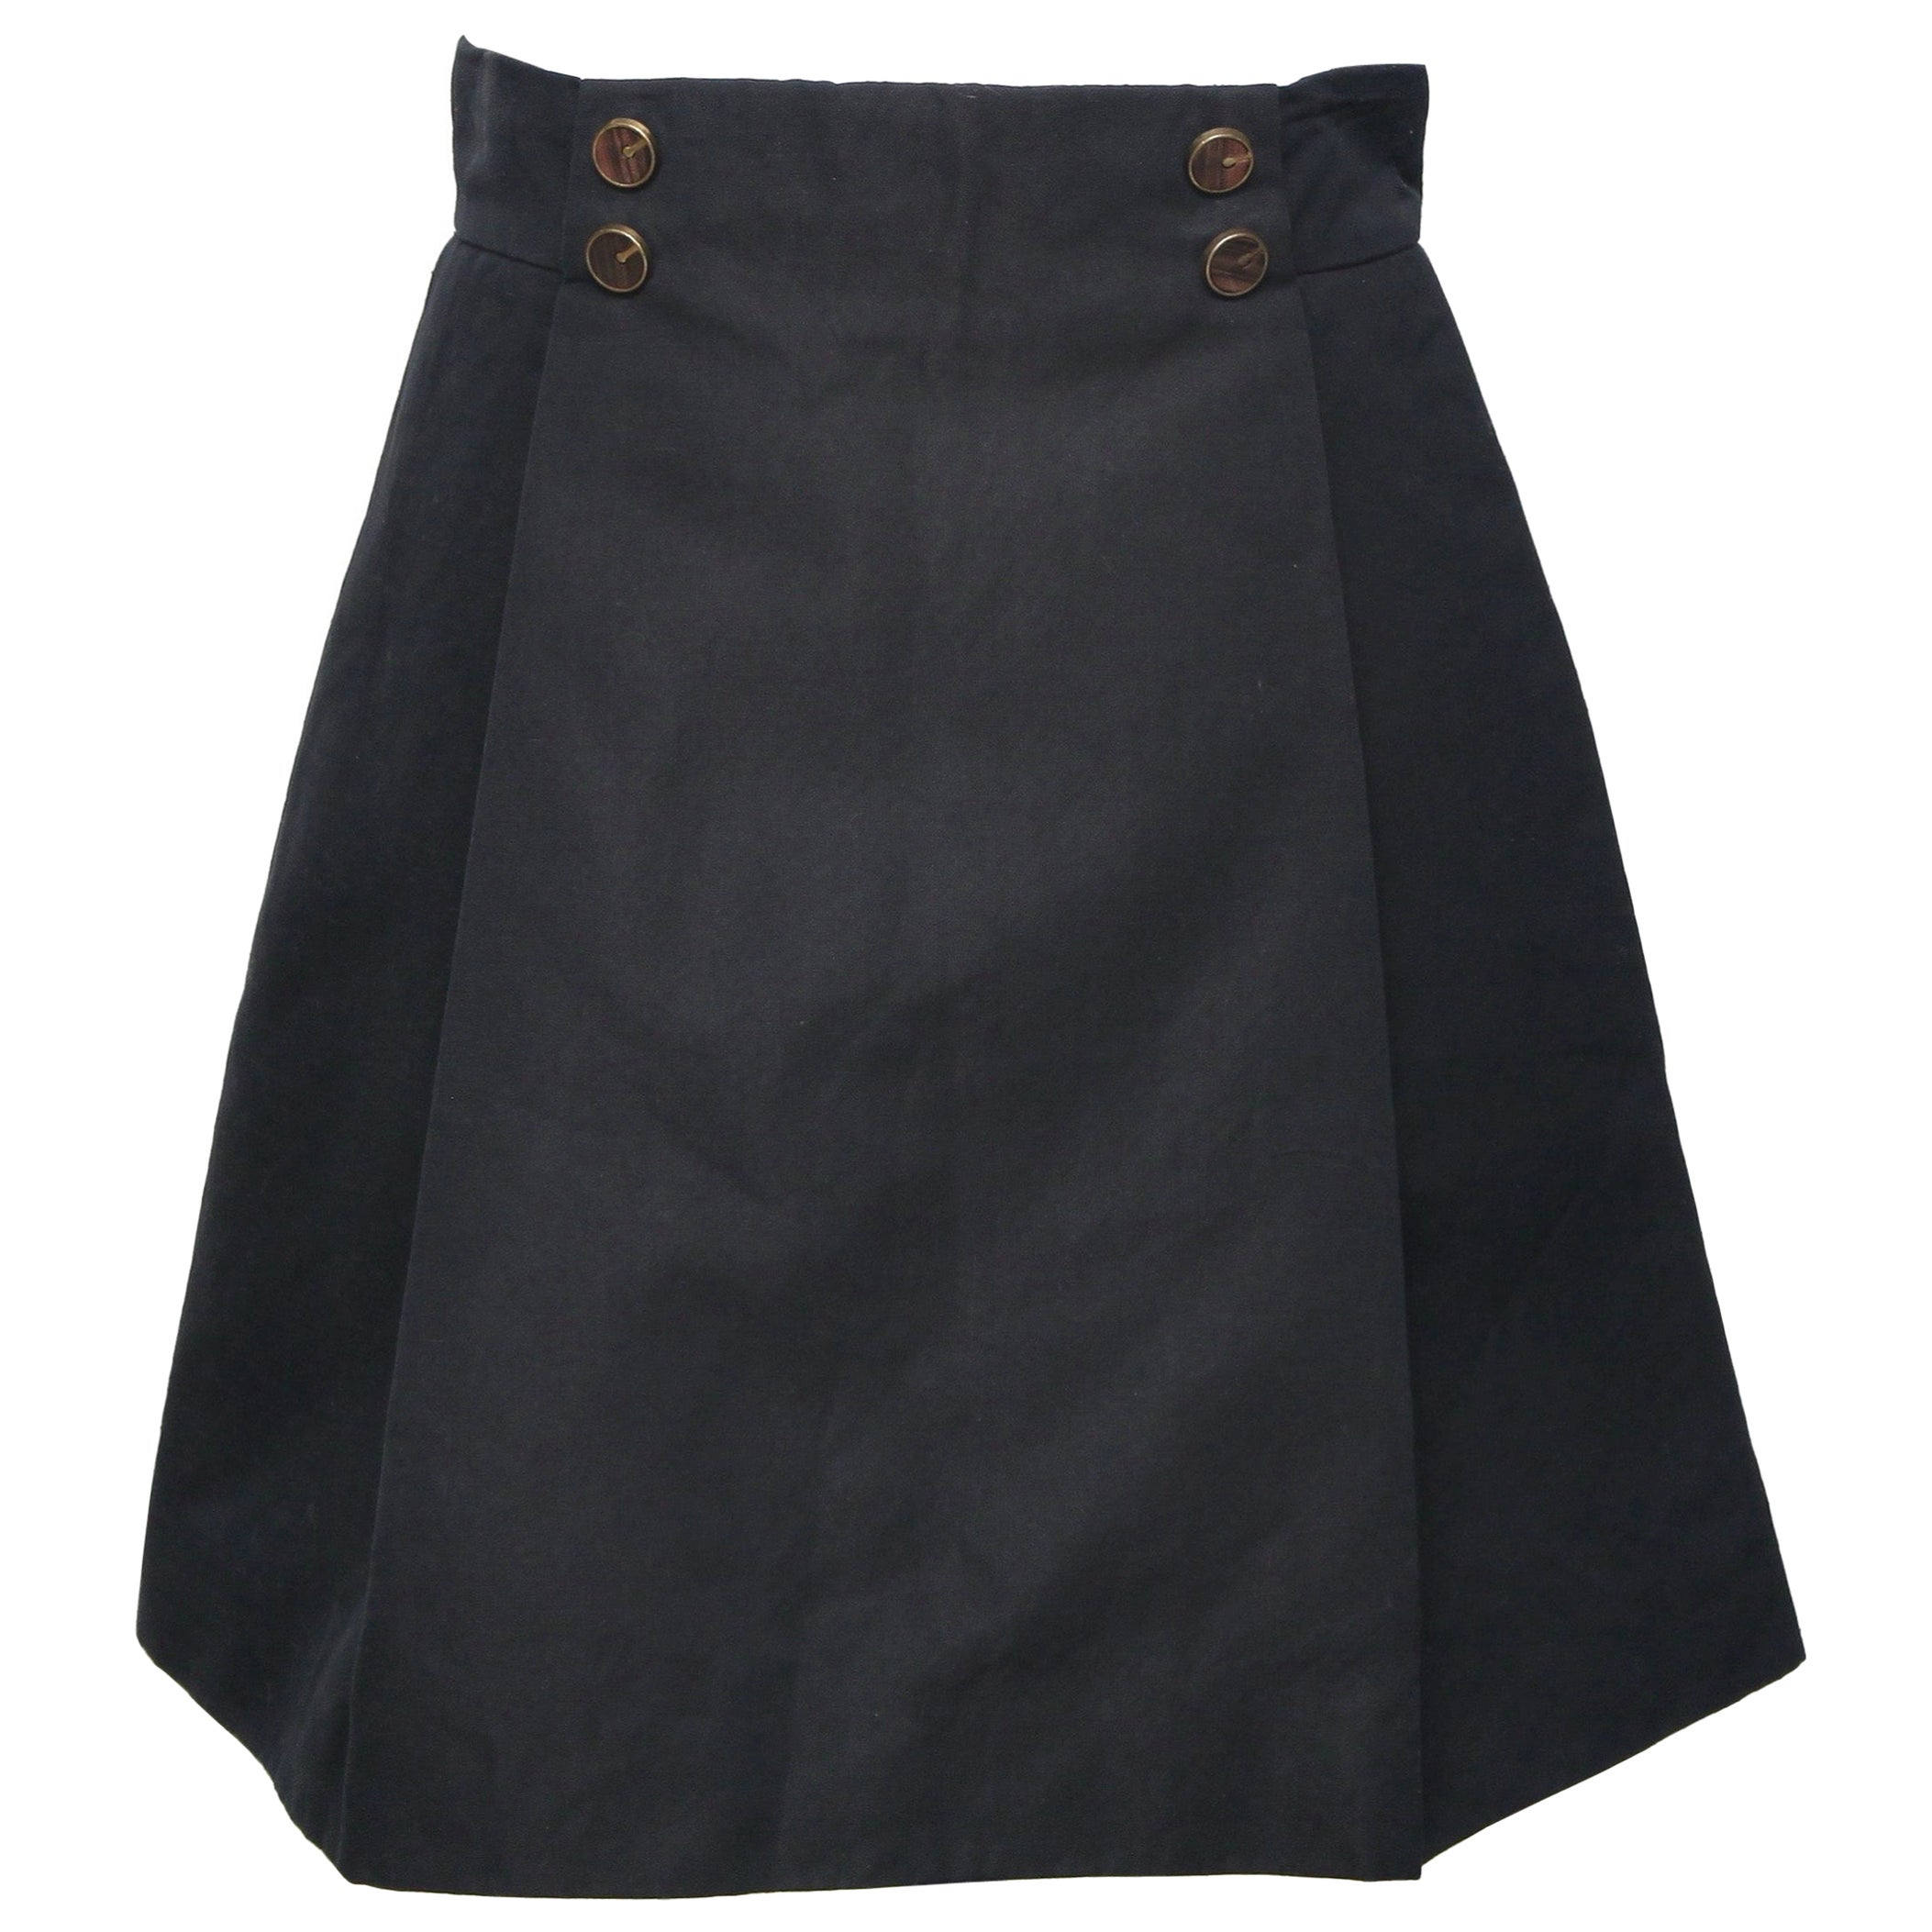 CHLOE Skirt A-Line Black Cotton Clothing Dress Pleated Buttons Sz 42 2007 For Sale